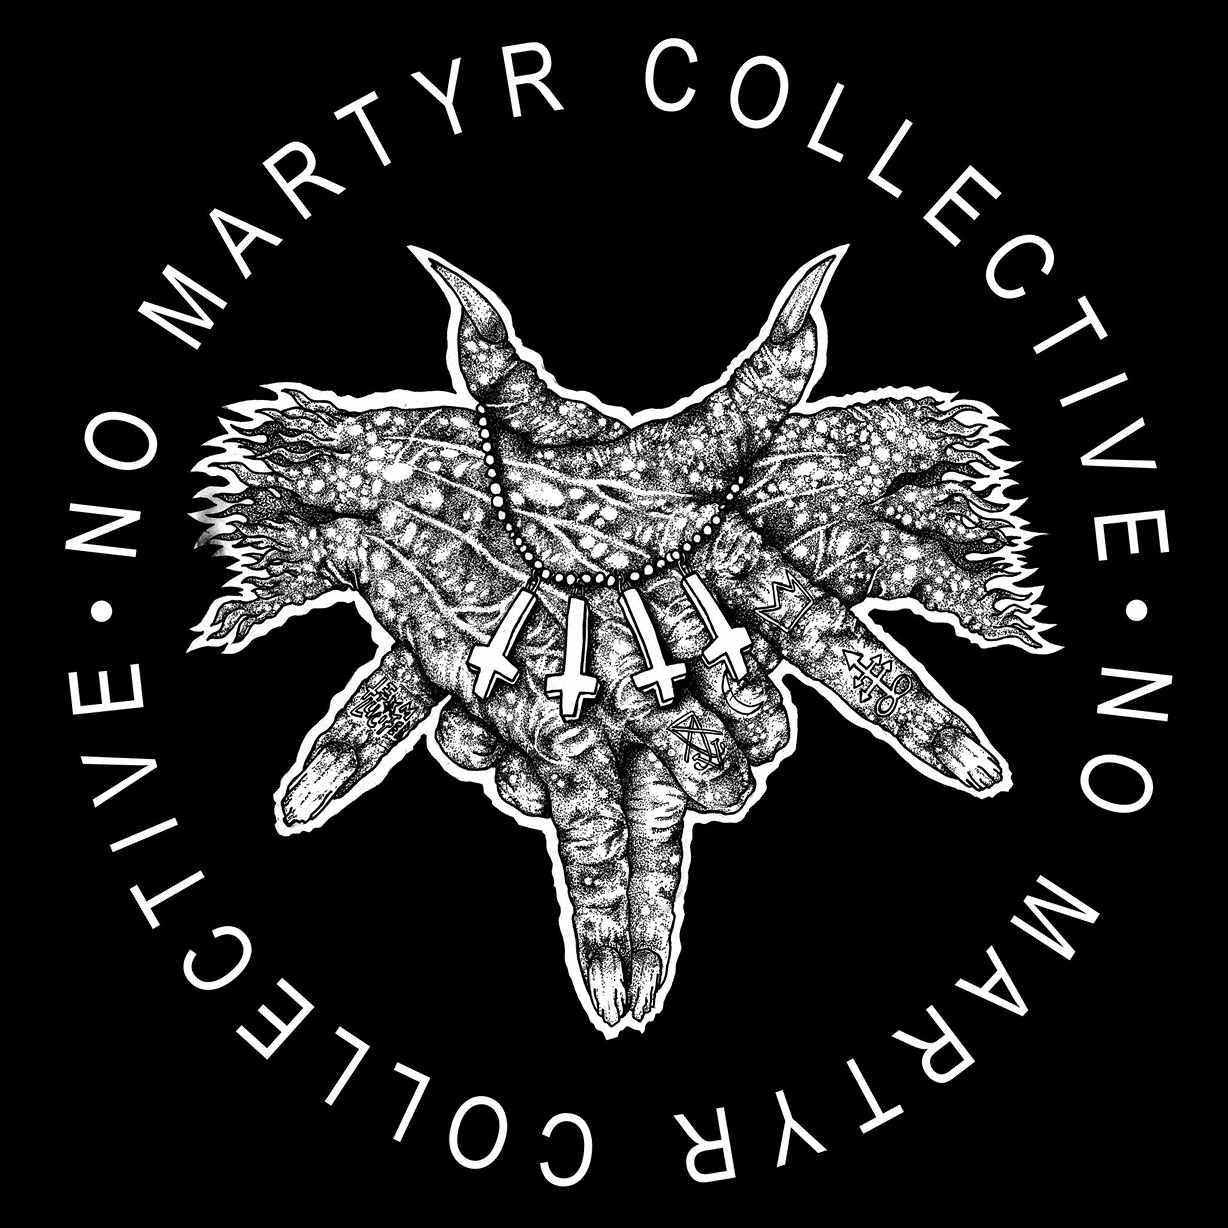 A héten indul a NO MARTYR COLLECTIVE turné! (BIPOLARIS / BEERZEBUB / DEVOID / WITCHTHRONE)